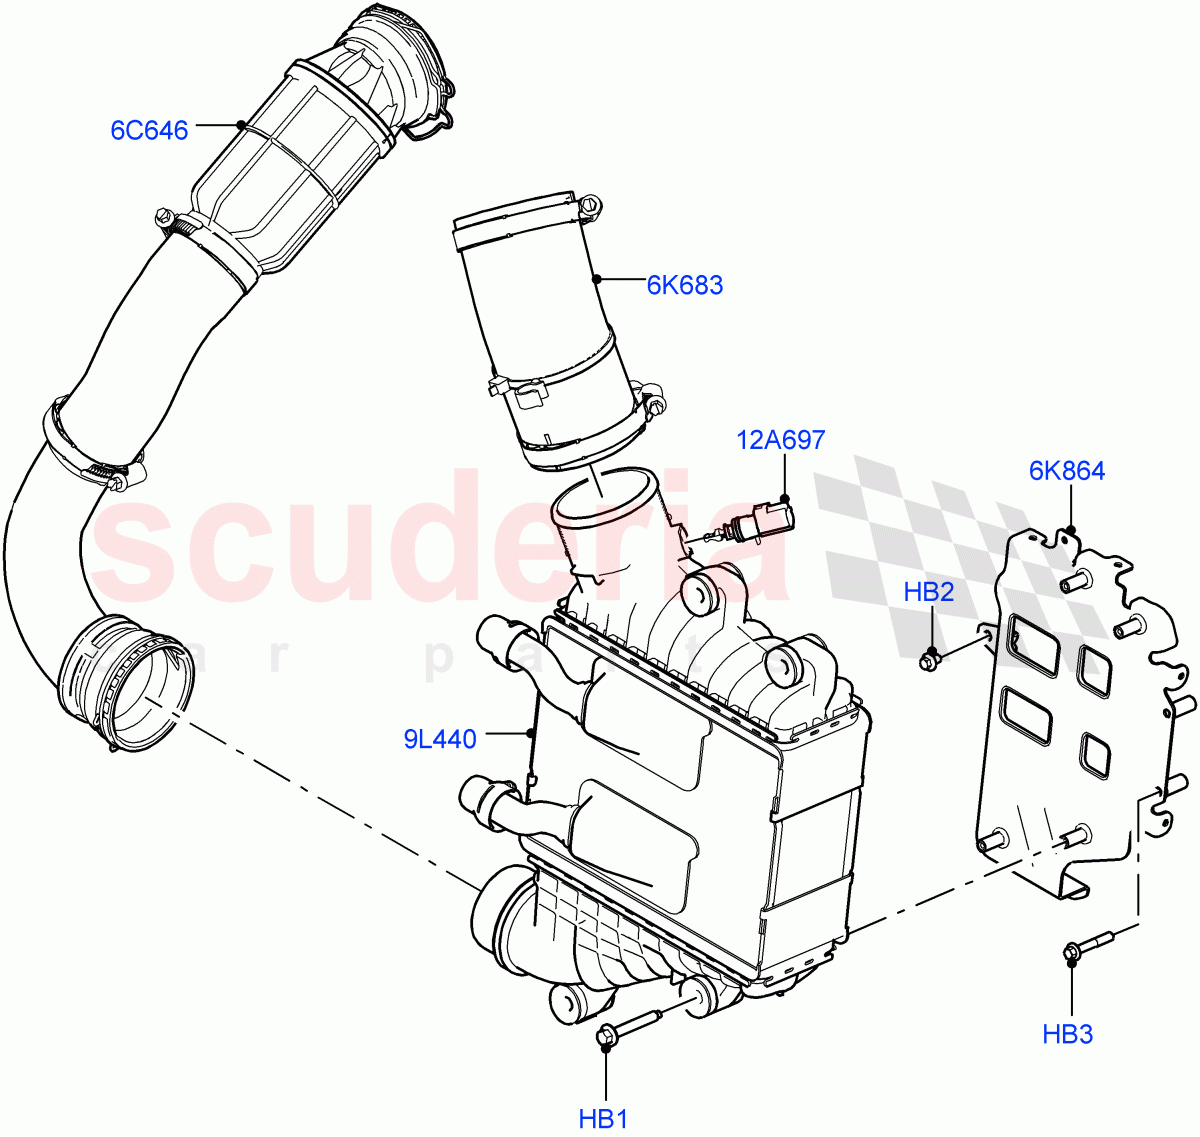 Intercooler/Air Ducts And Hoses(2.0L I4 DSL HIGH DOHC AJ200)((V)FROMJH000001) of Land Rover Land Rover Range Rover Evoque (2012-2018) [2.0 Turbo Diesel]